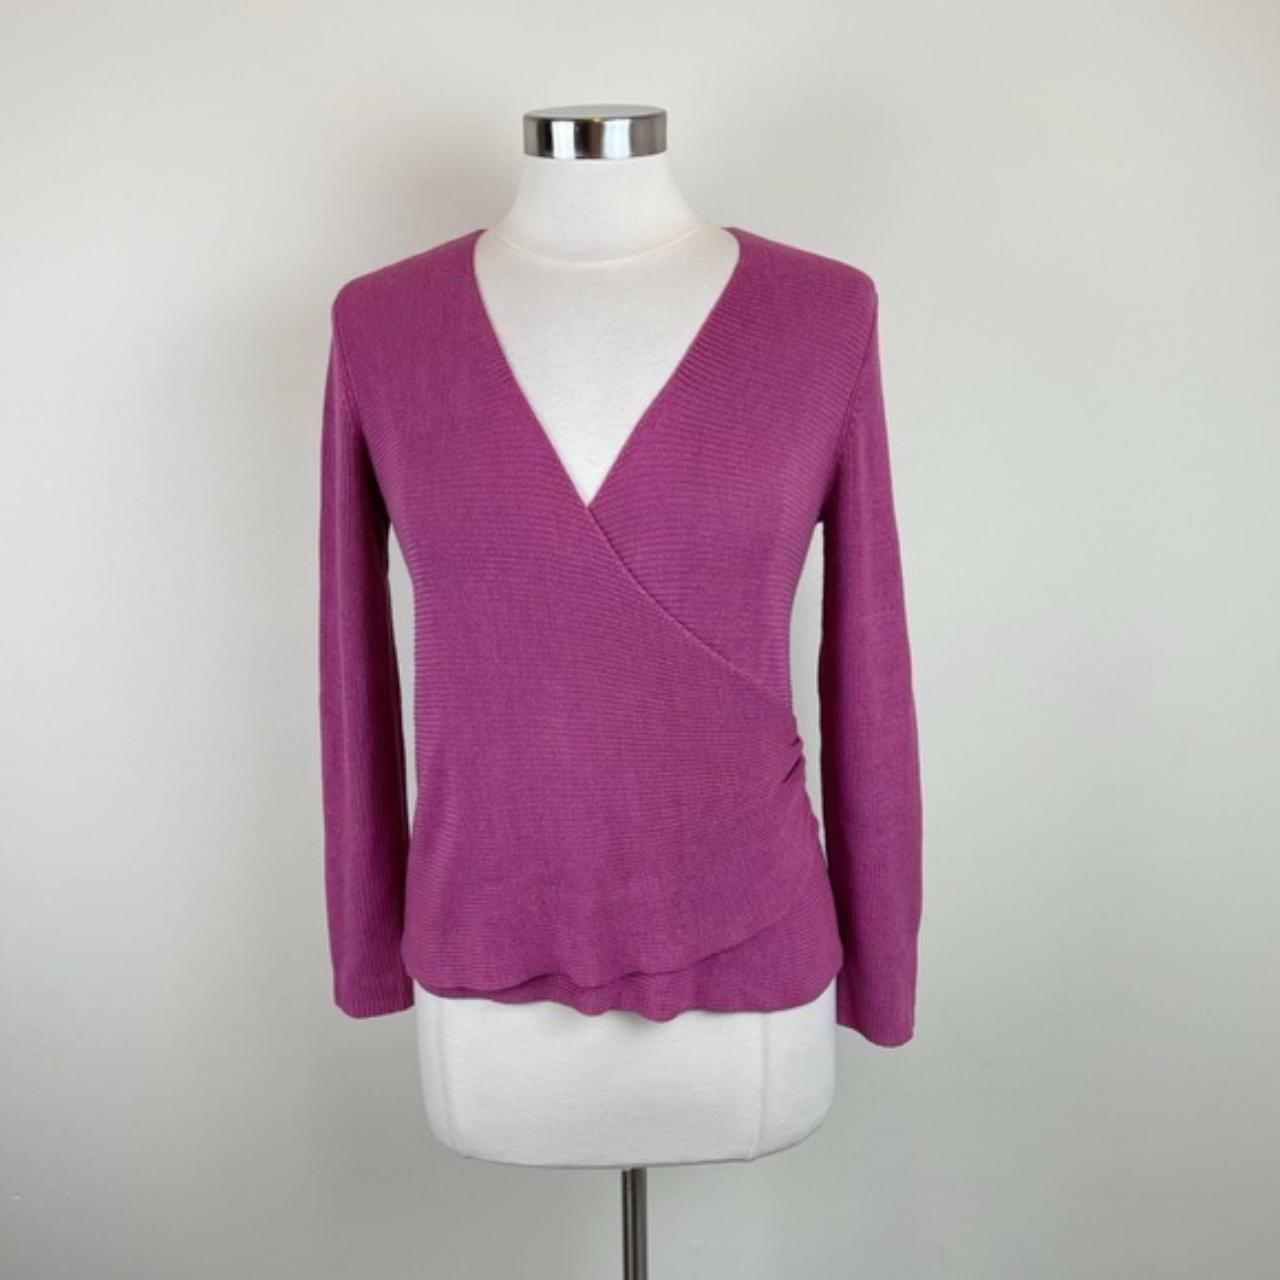 J Jill size medium cardigan - clothing & accessories - by owner